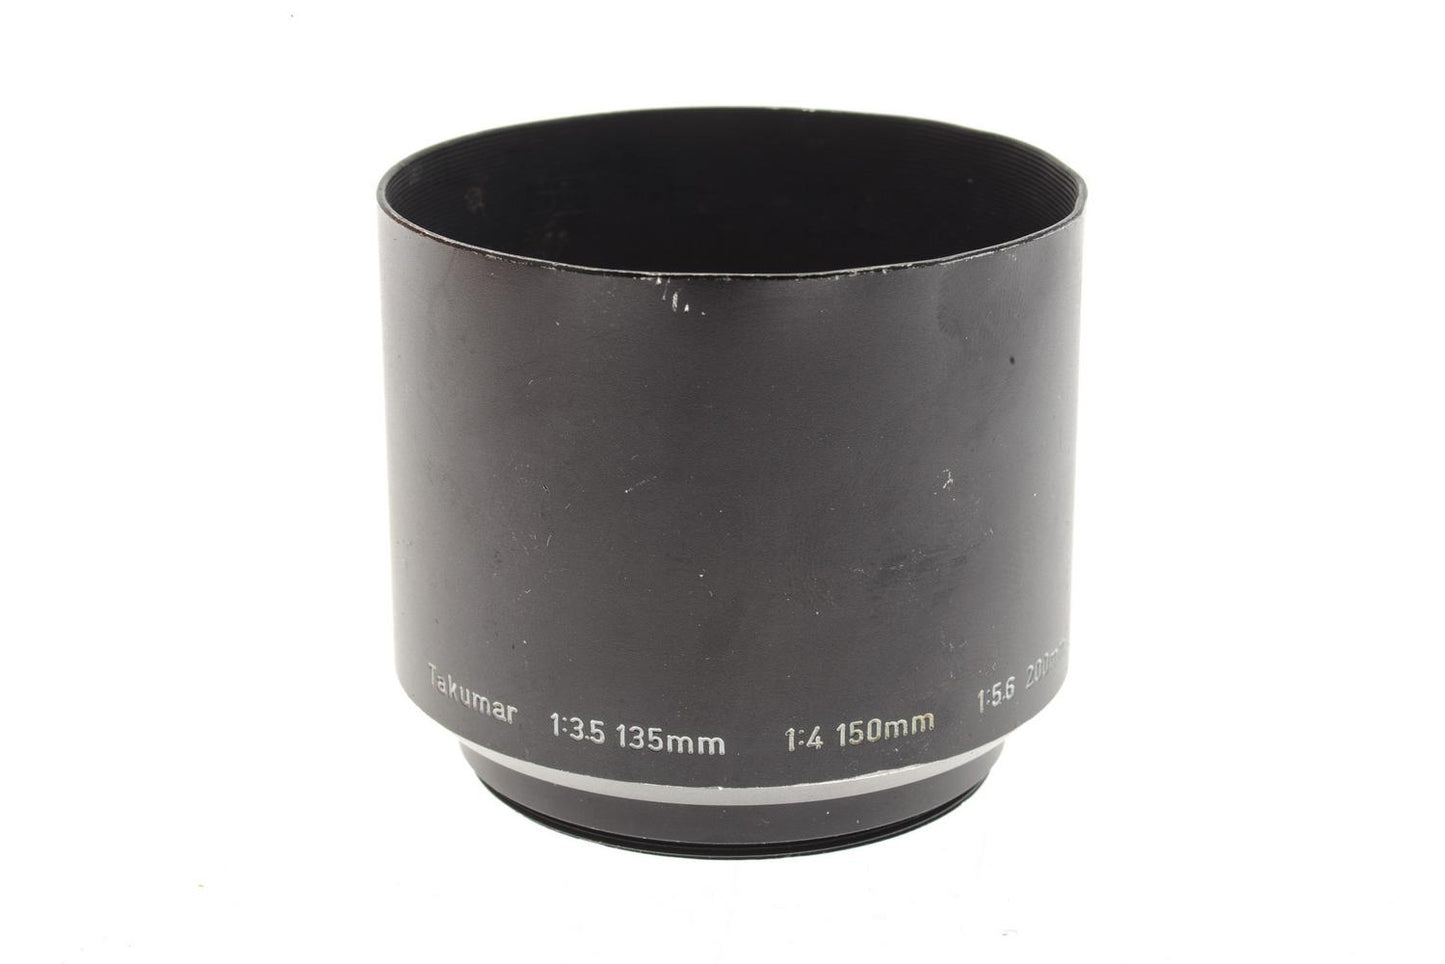 Pentax 49mm Lens Hood for 135mm f3.5, 150mm f4, and 200mm f5.6 - Accessory